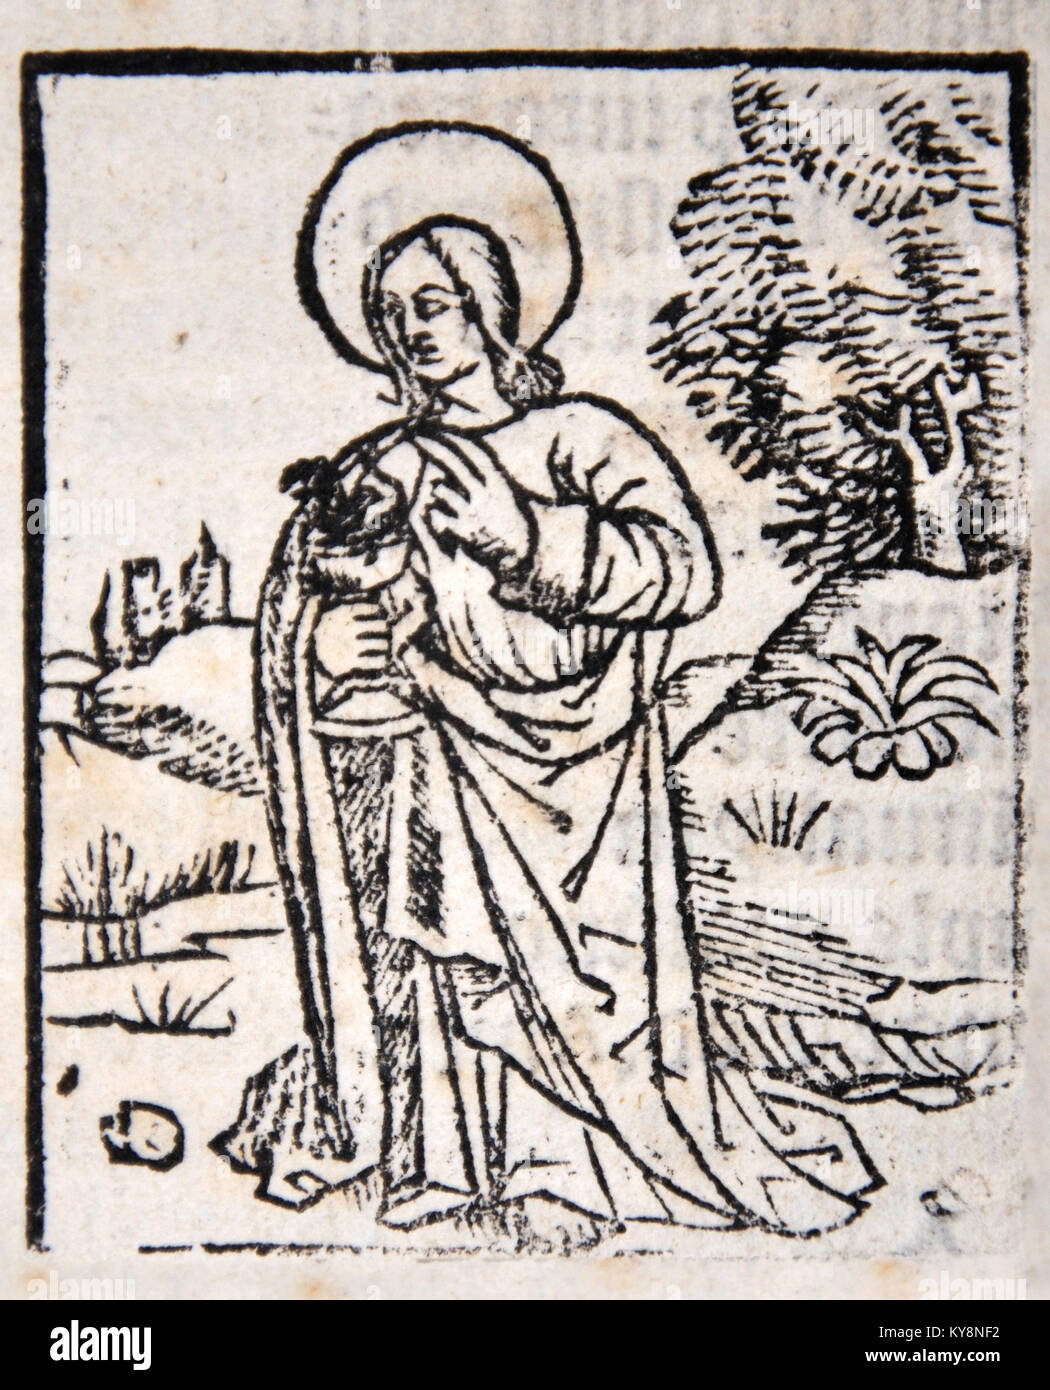 Illustration of an apostle from a Title Page in William Tyndale's 1538 edition of the English New Testament, which showed the English text and Erasmus' Latin text. From the Reed Rare Books Collection in Dunedin, New Zealand. Stock Photo